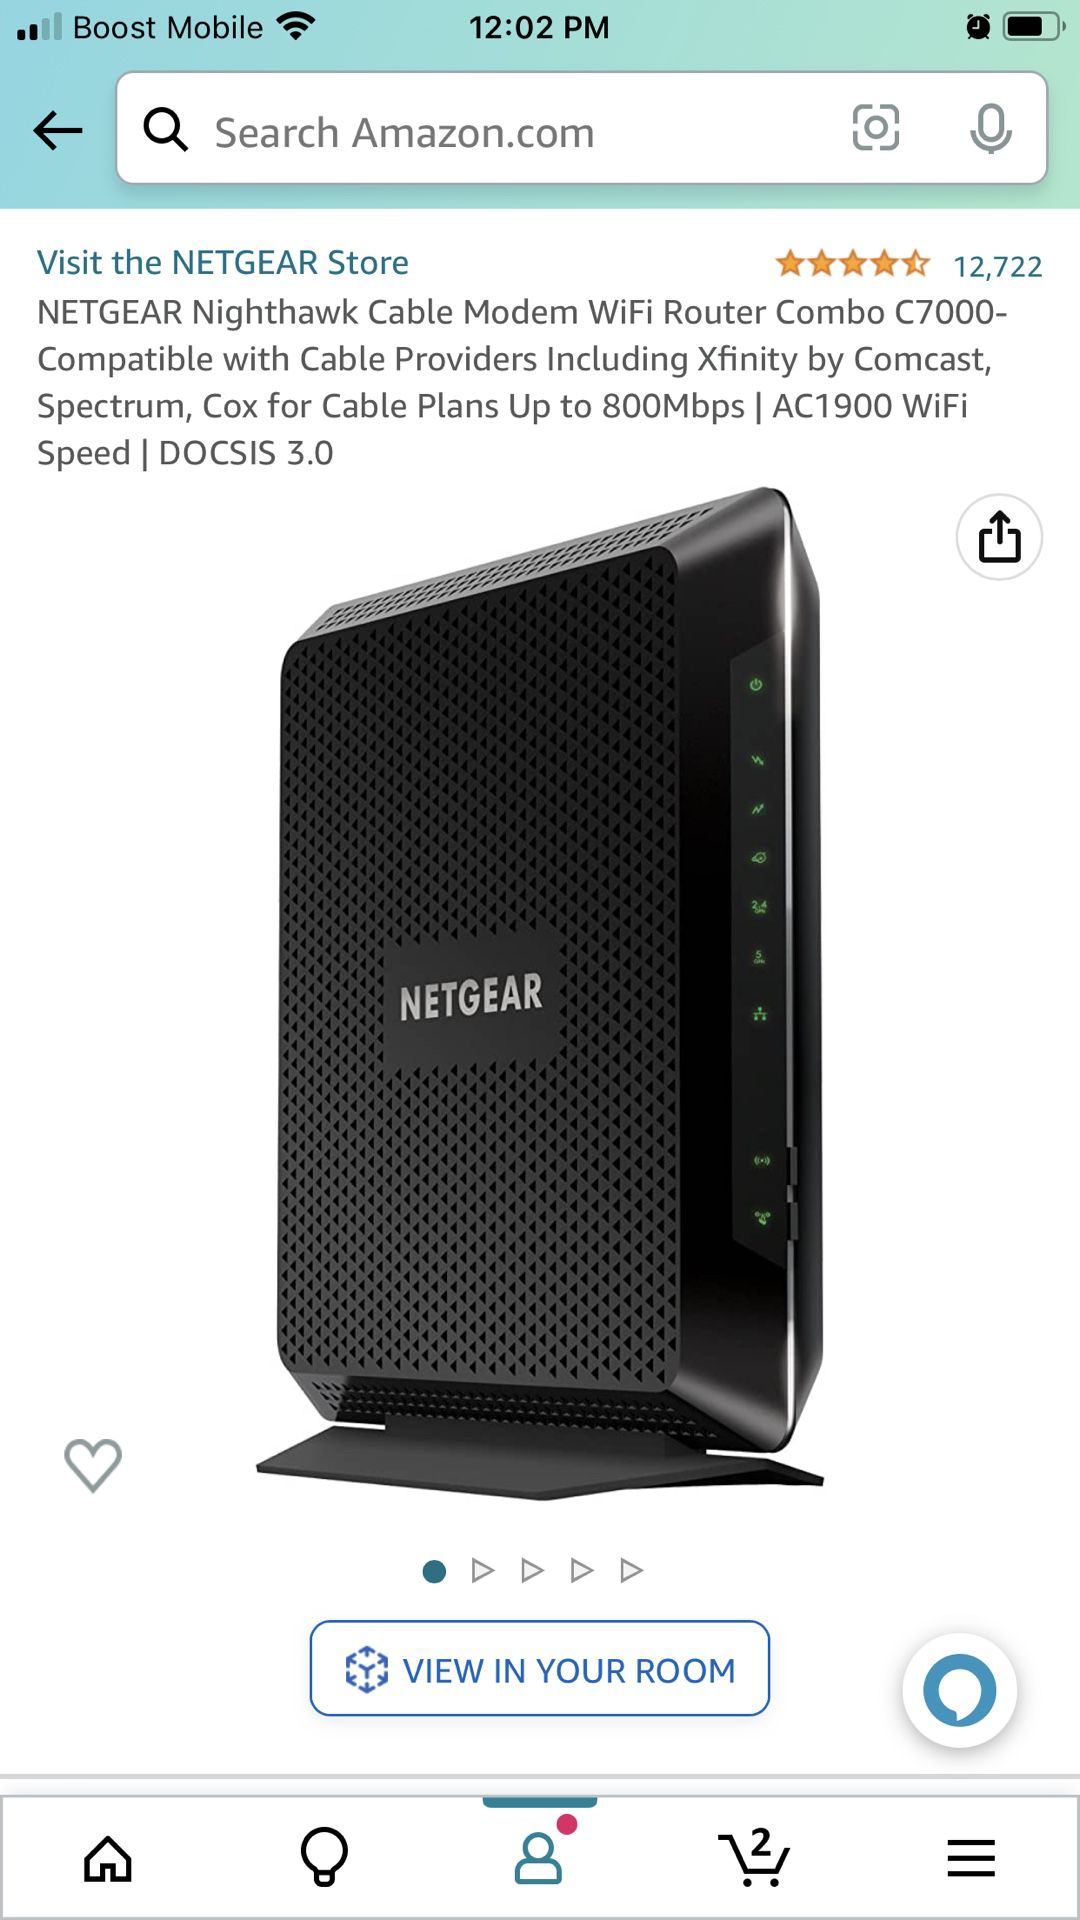 Netgear Nighthawk Cable Modem WiFi Router Combo C7000-Compatibility Cable Providers including Xfinity by Comcast, Spectrum, Cox